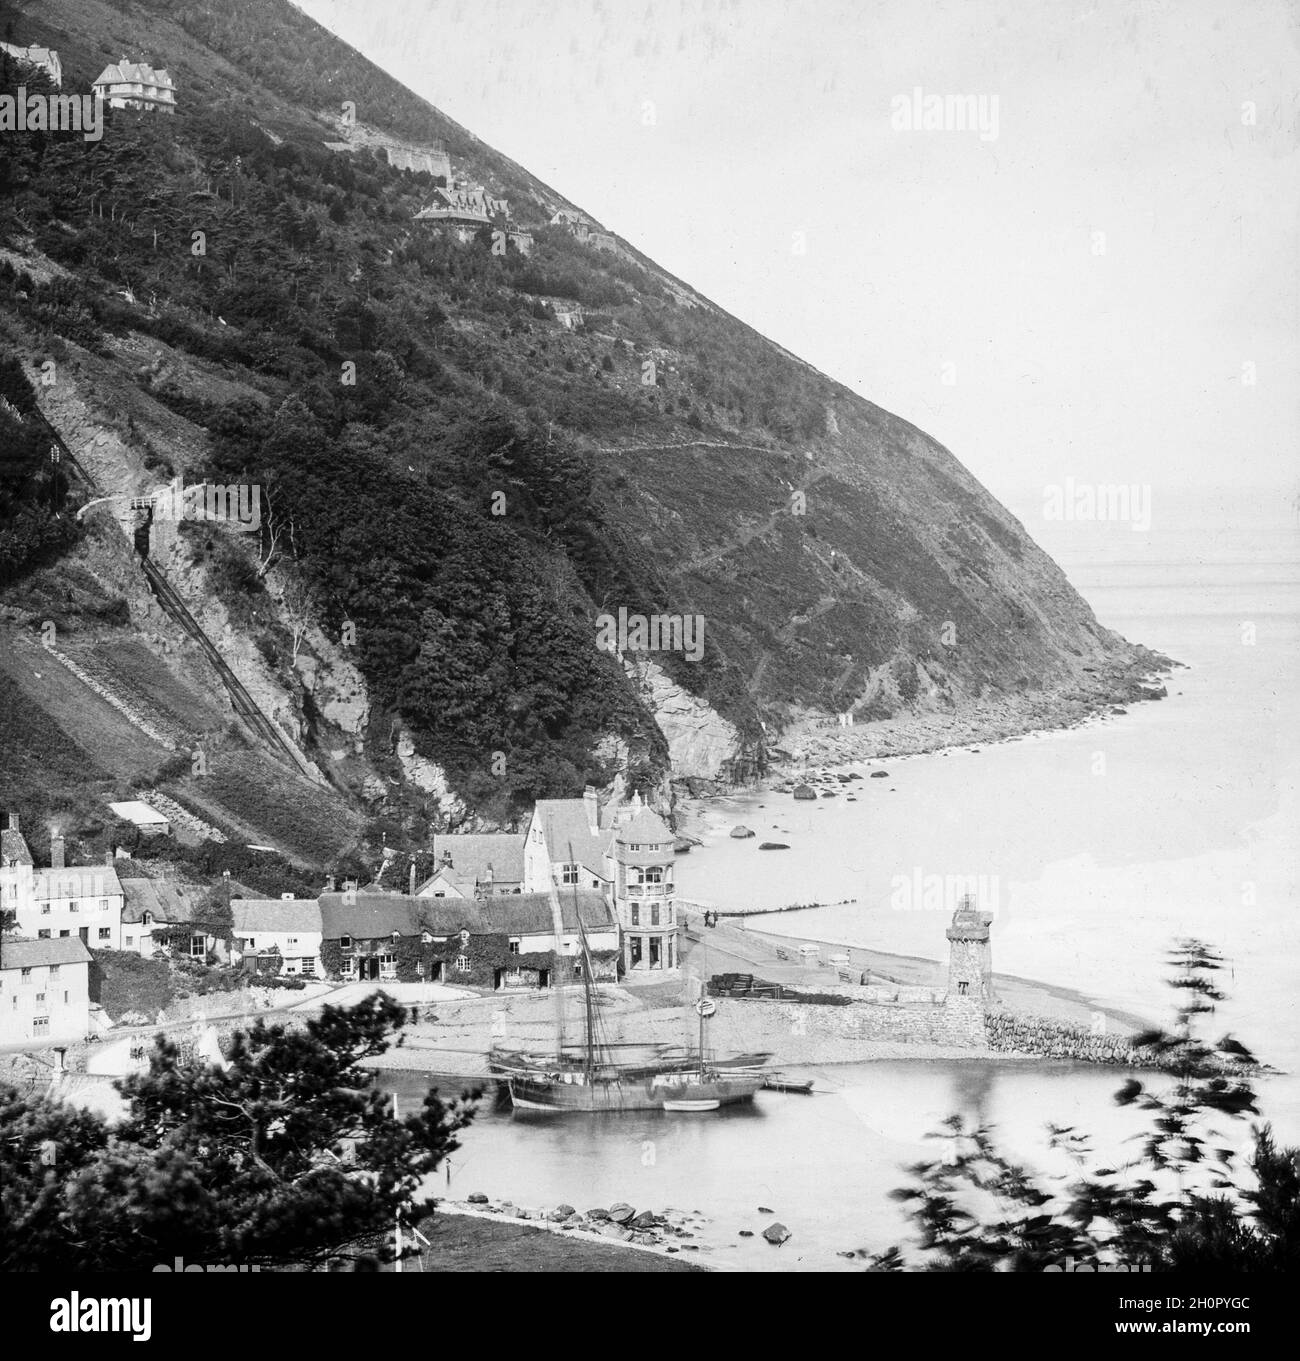 Vintage late Victorian black and white photograph showing the harbour at Lynmouth in Devon, England. On view is the Rhenish Tower along with sailing boats of the era. Stock Photo